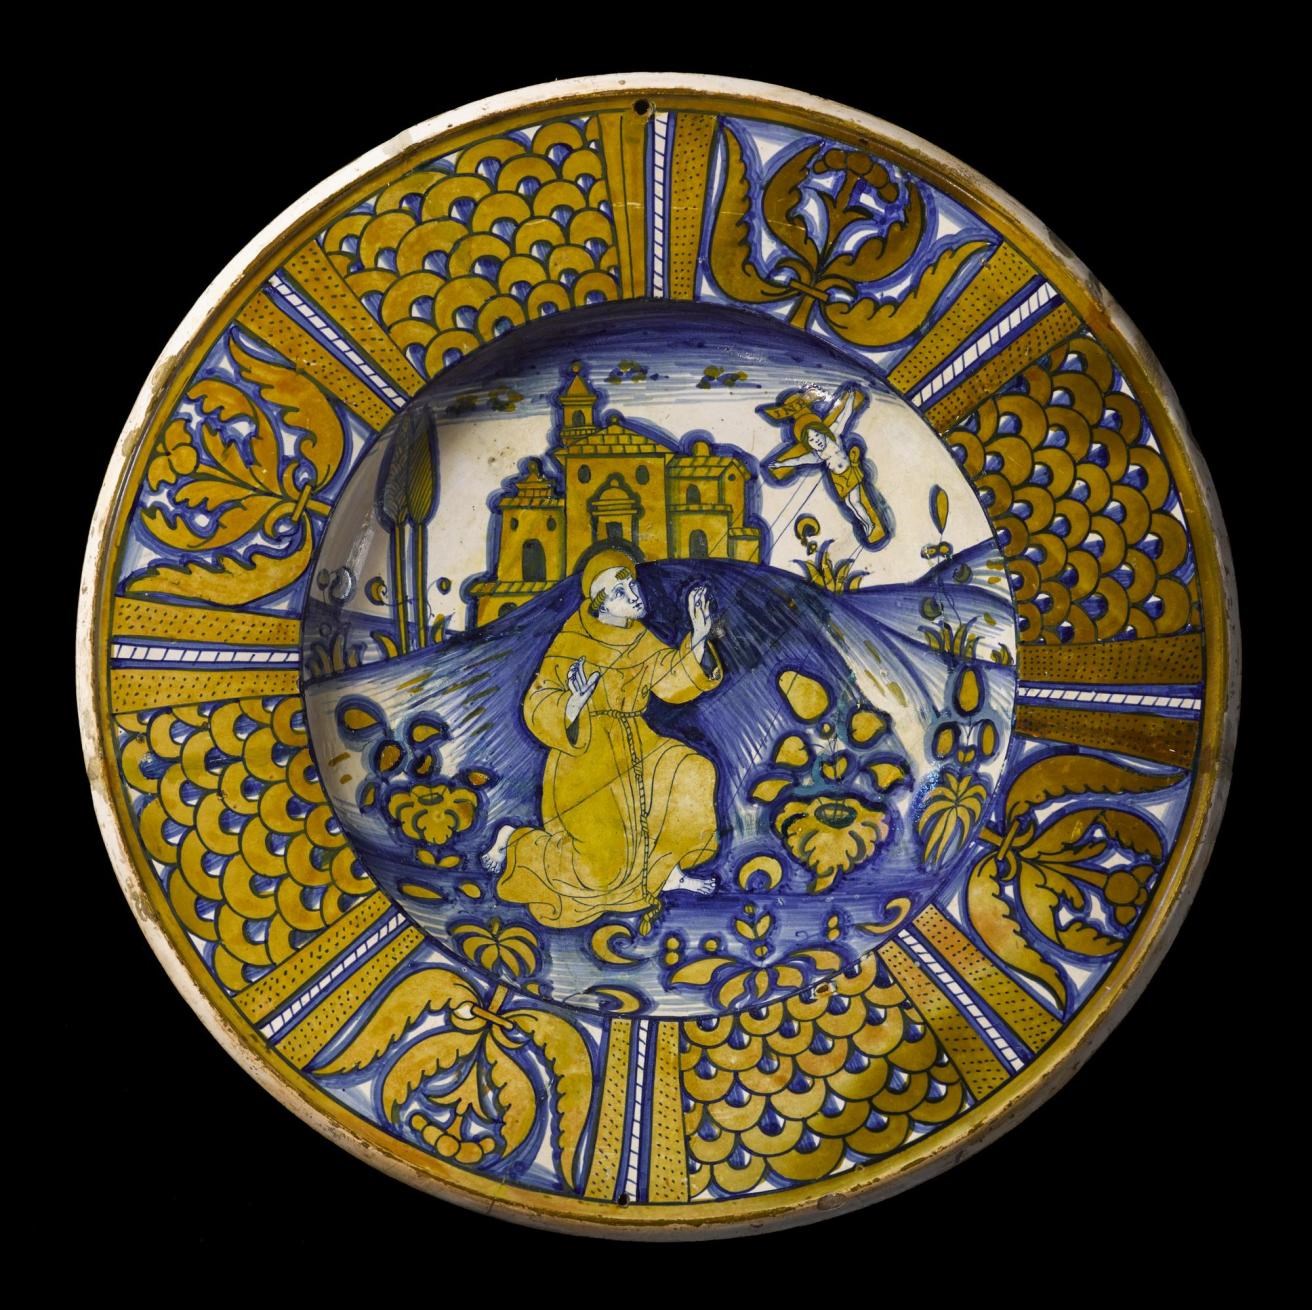 This 16th-century maiolica dish from Italy shows St Francis of Assisi.